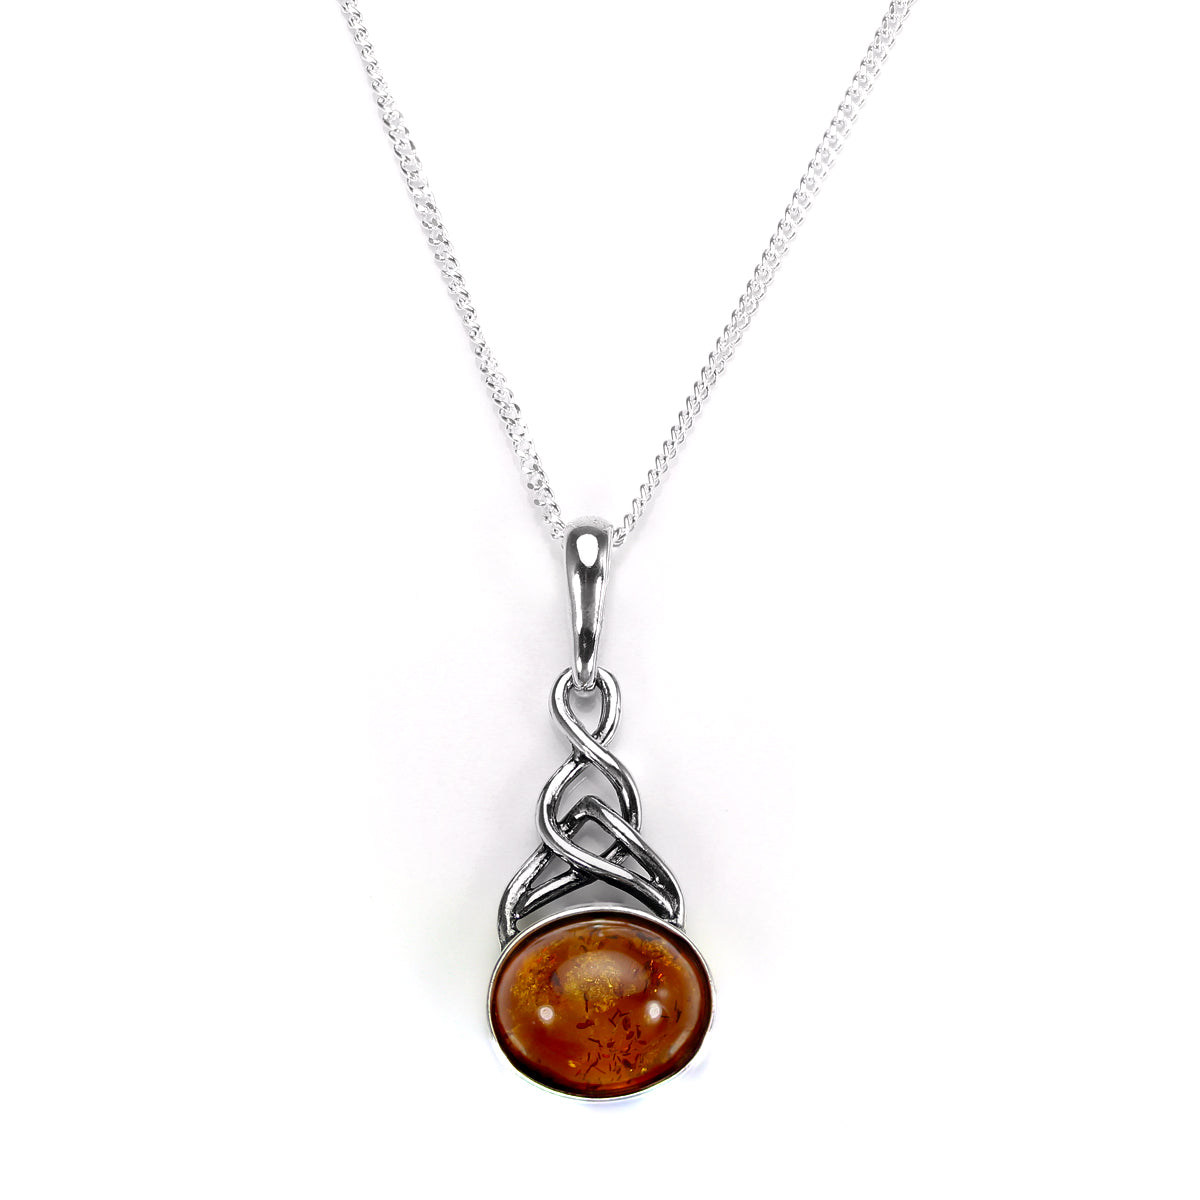 Woven Sterling Silver & Drop Baltic Amber Pendant